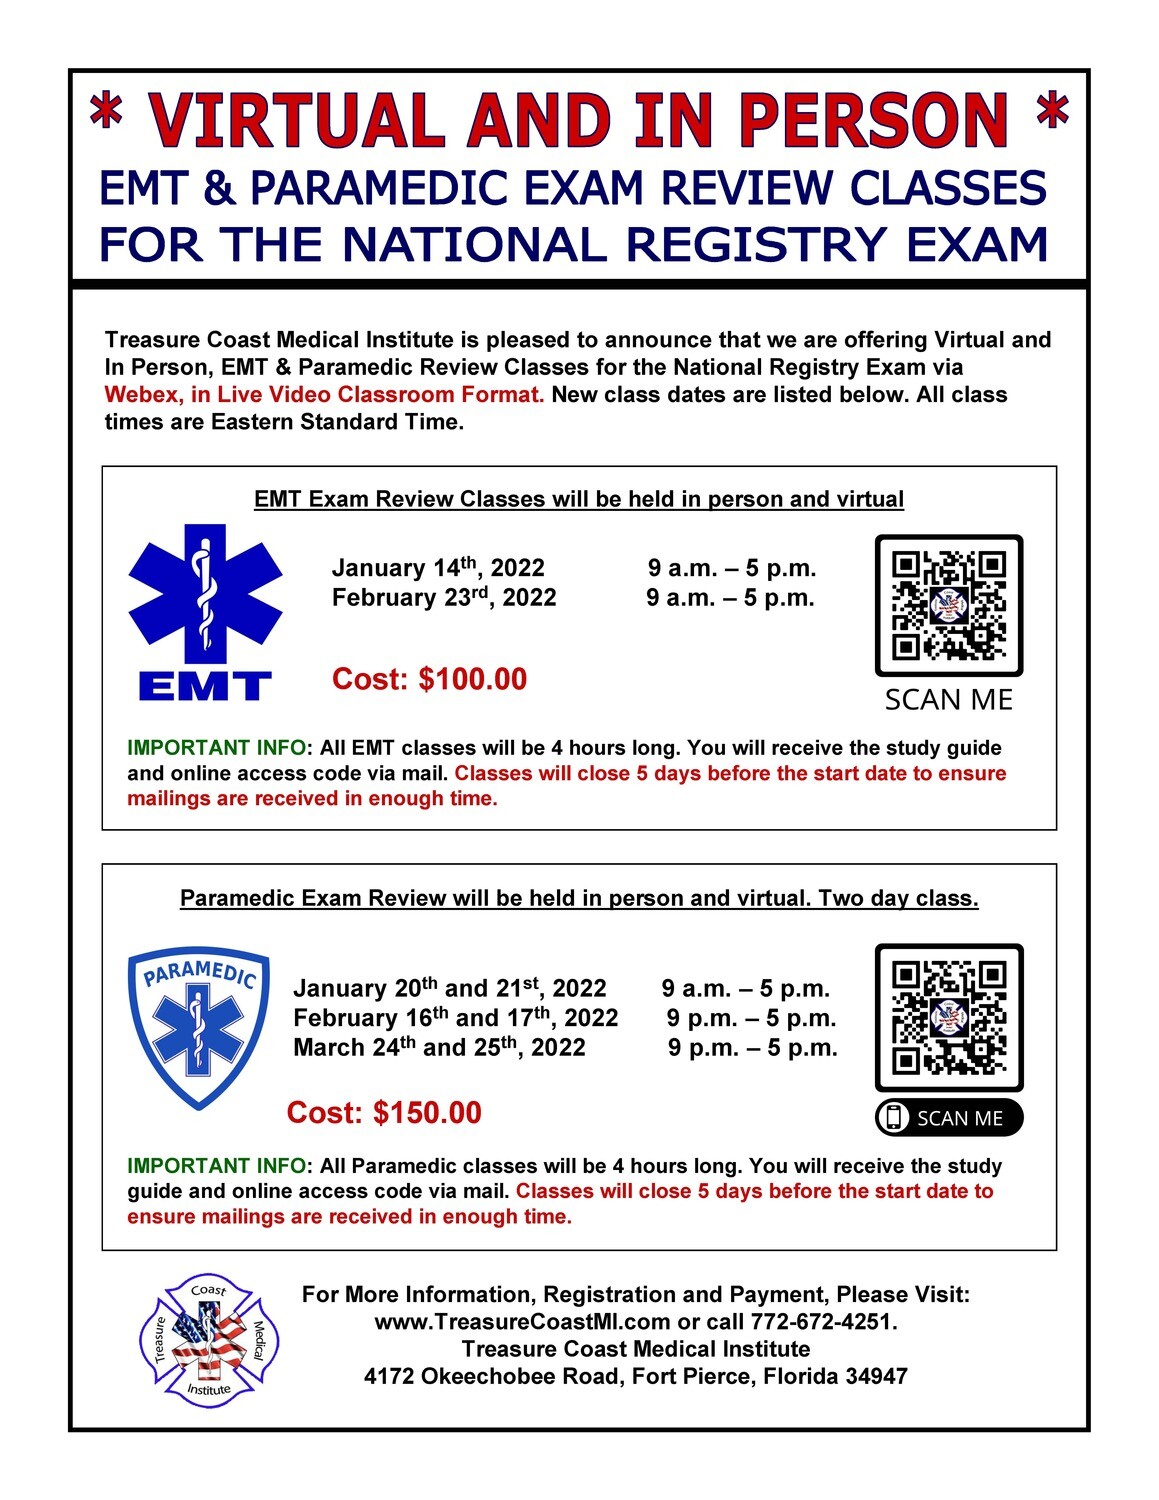 National Registry Paramedic March 24th and 25th Fort Pierce TCMI (IN PERSON)